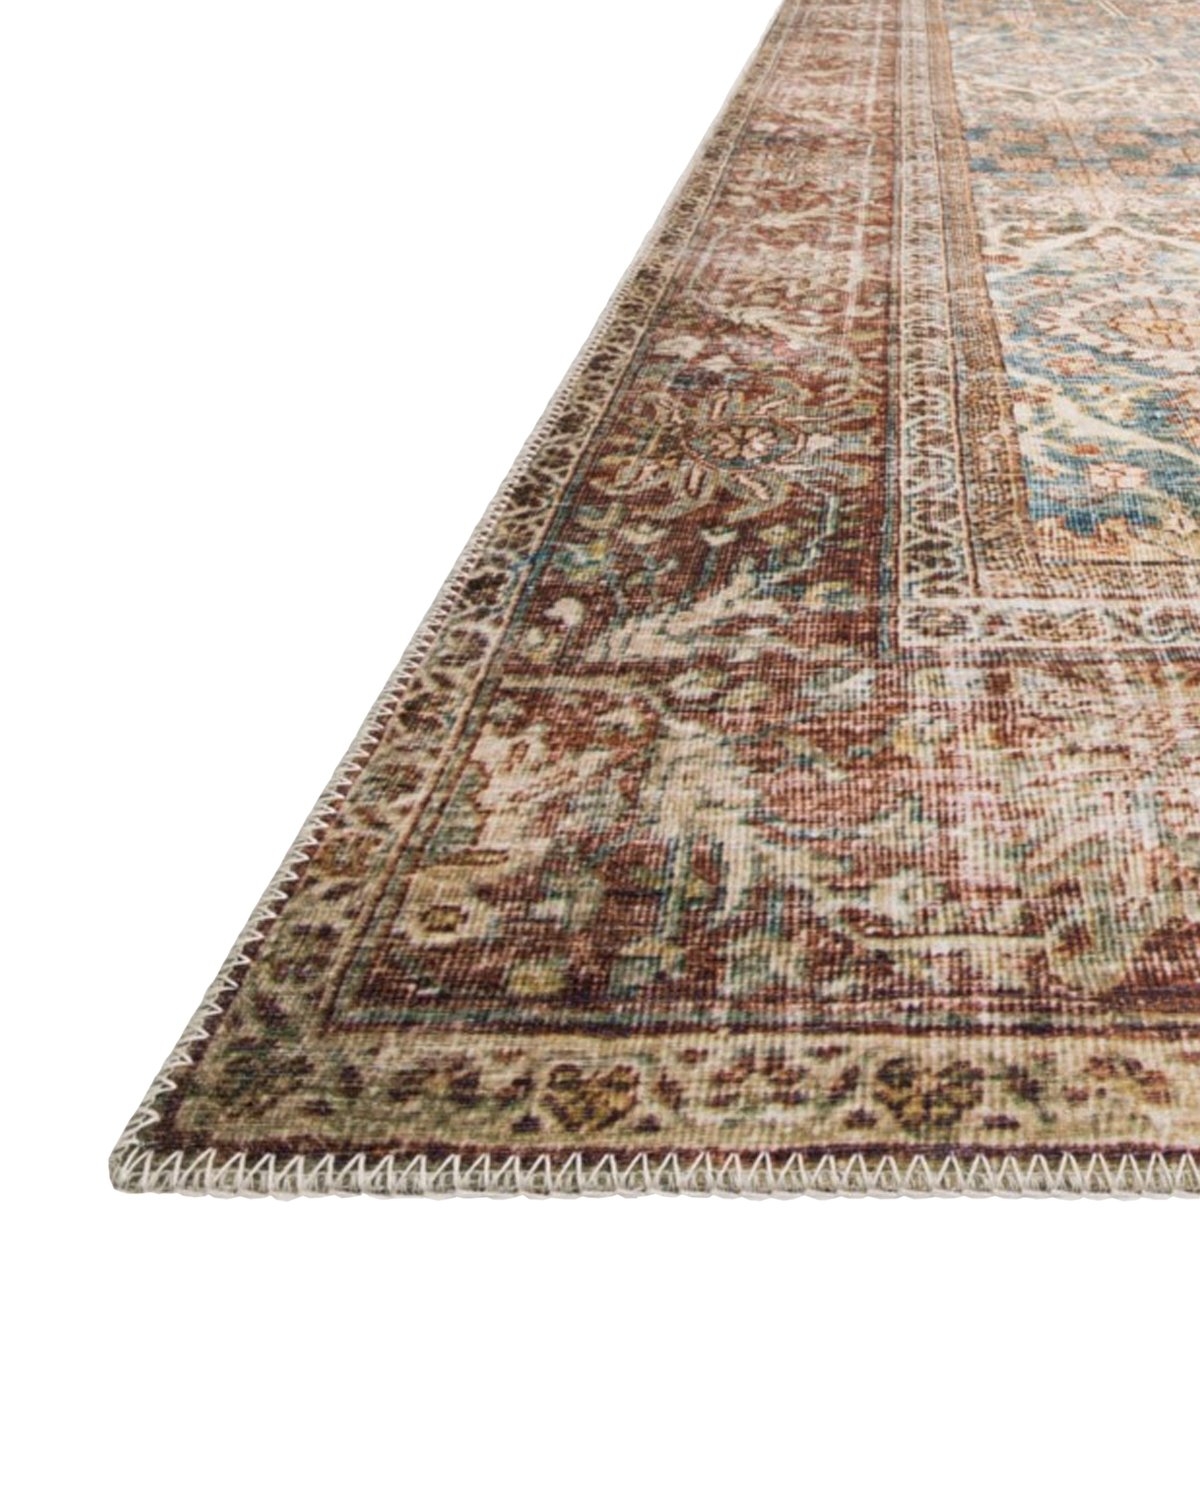 TUNIS PATTERNED RUG, 2'6" x 7'6" - Image 2